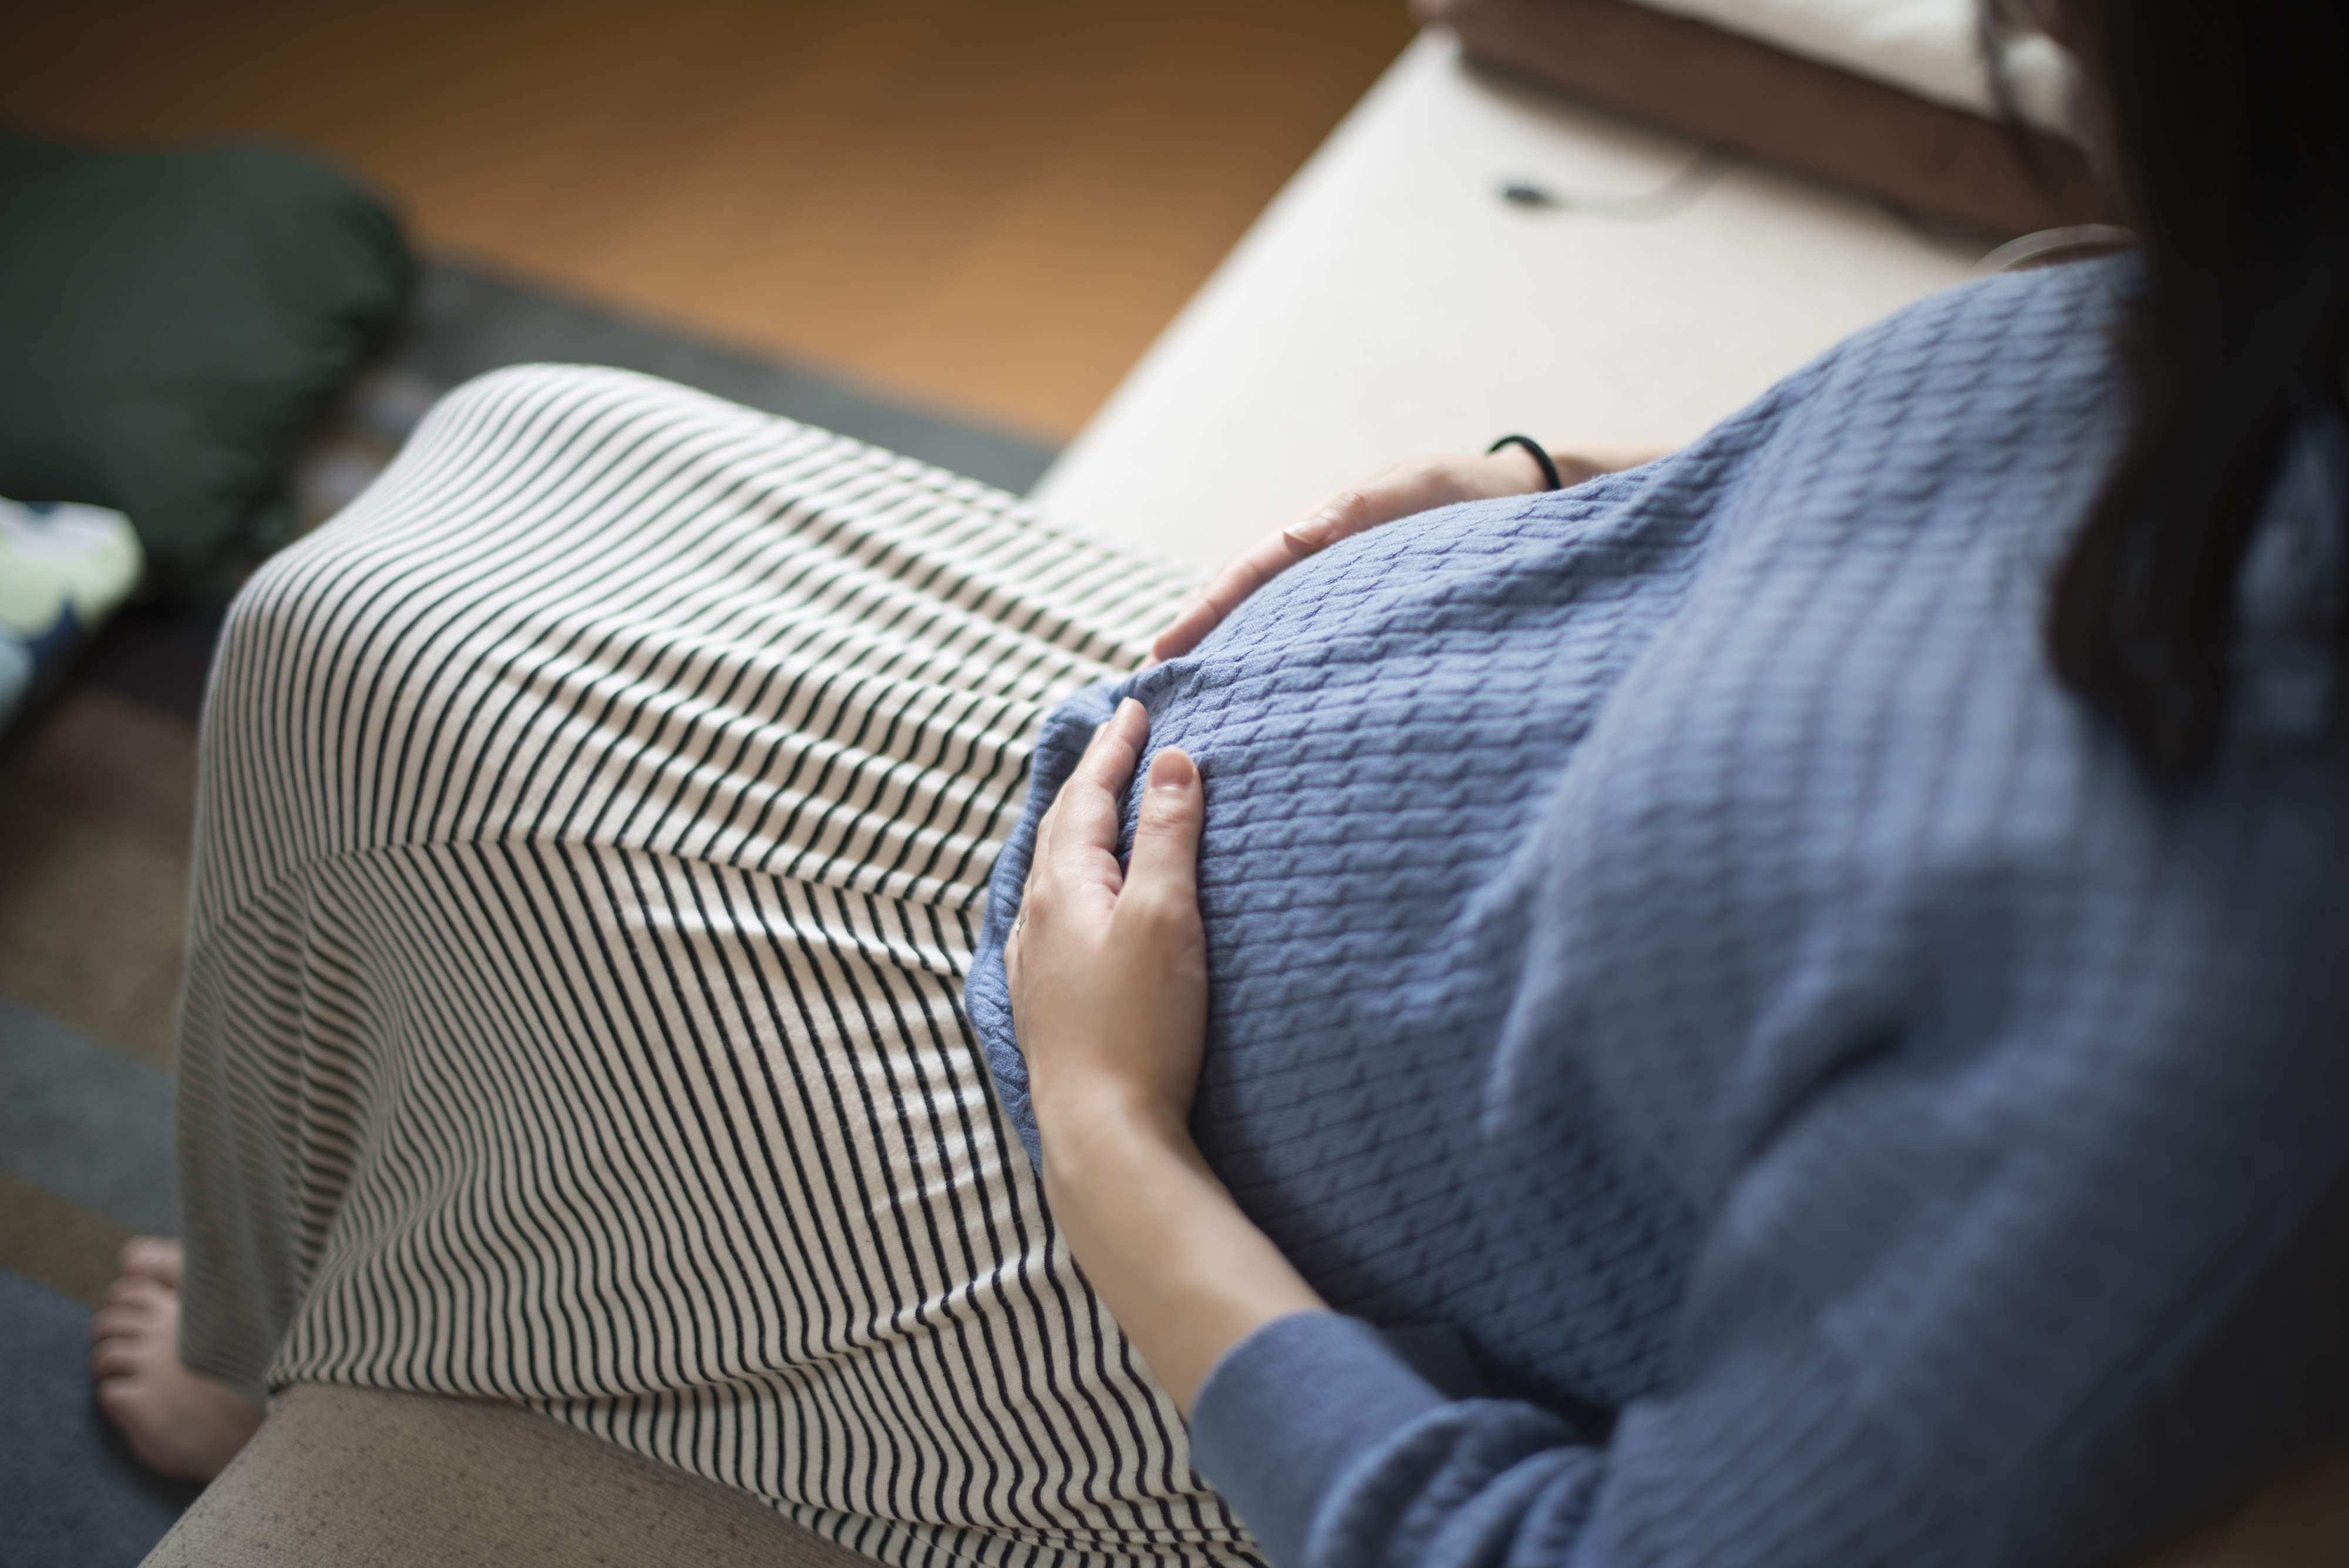 Pregnant person resting hand on belly, sitting with striped and knit fabrics visible